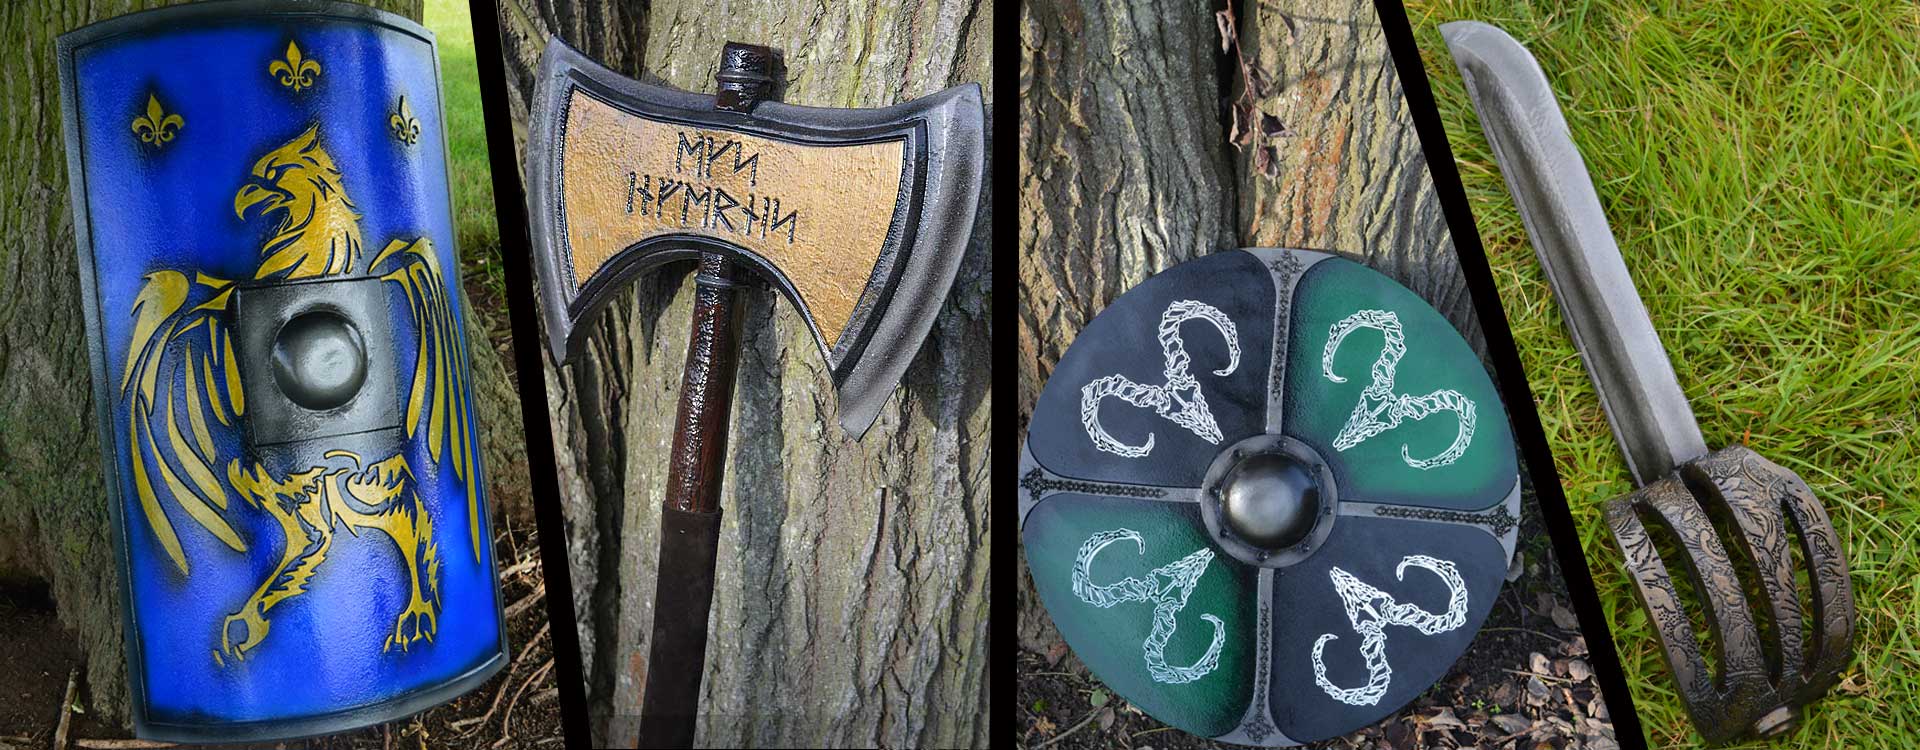 Larp Inn Weapons and Banners